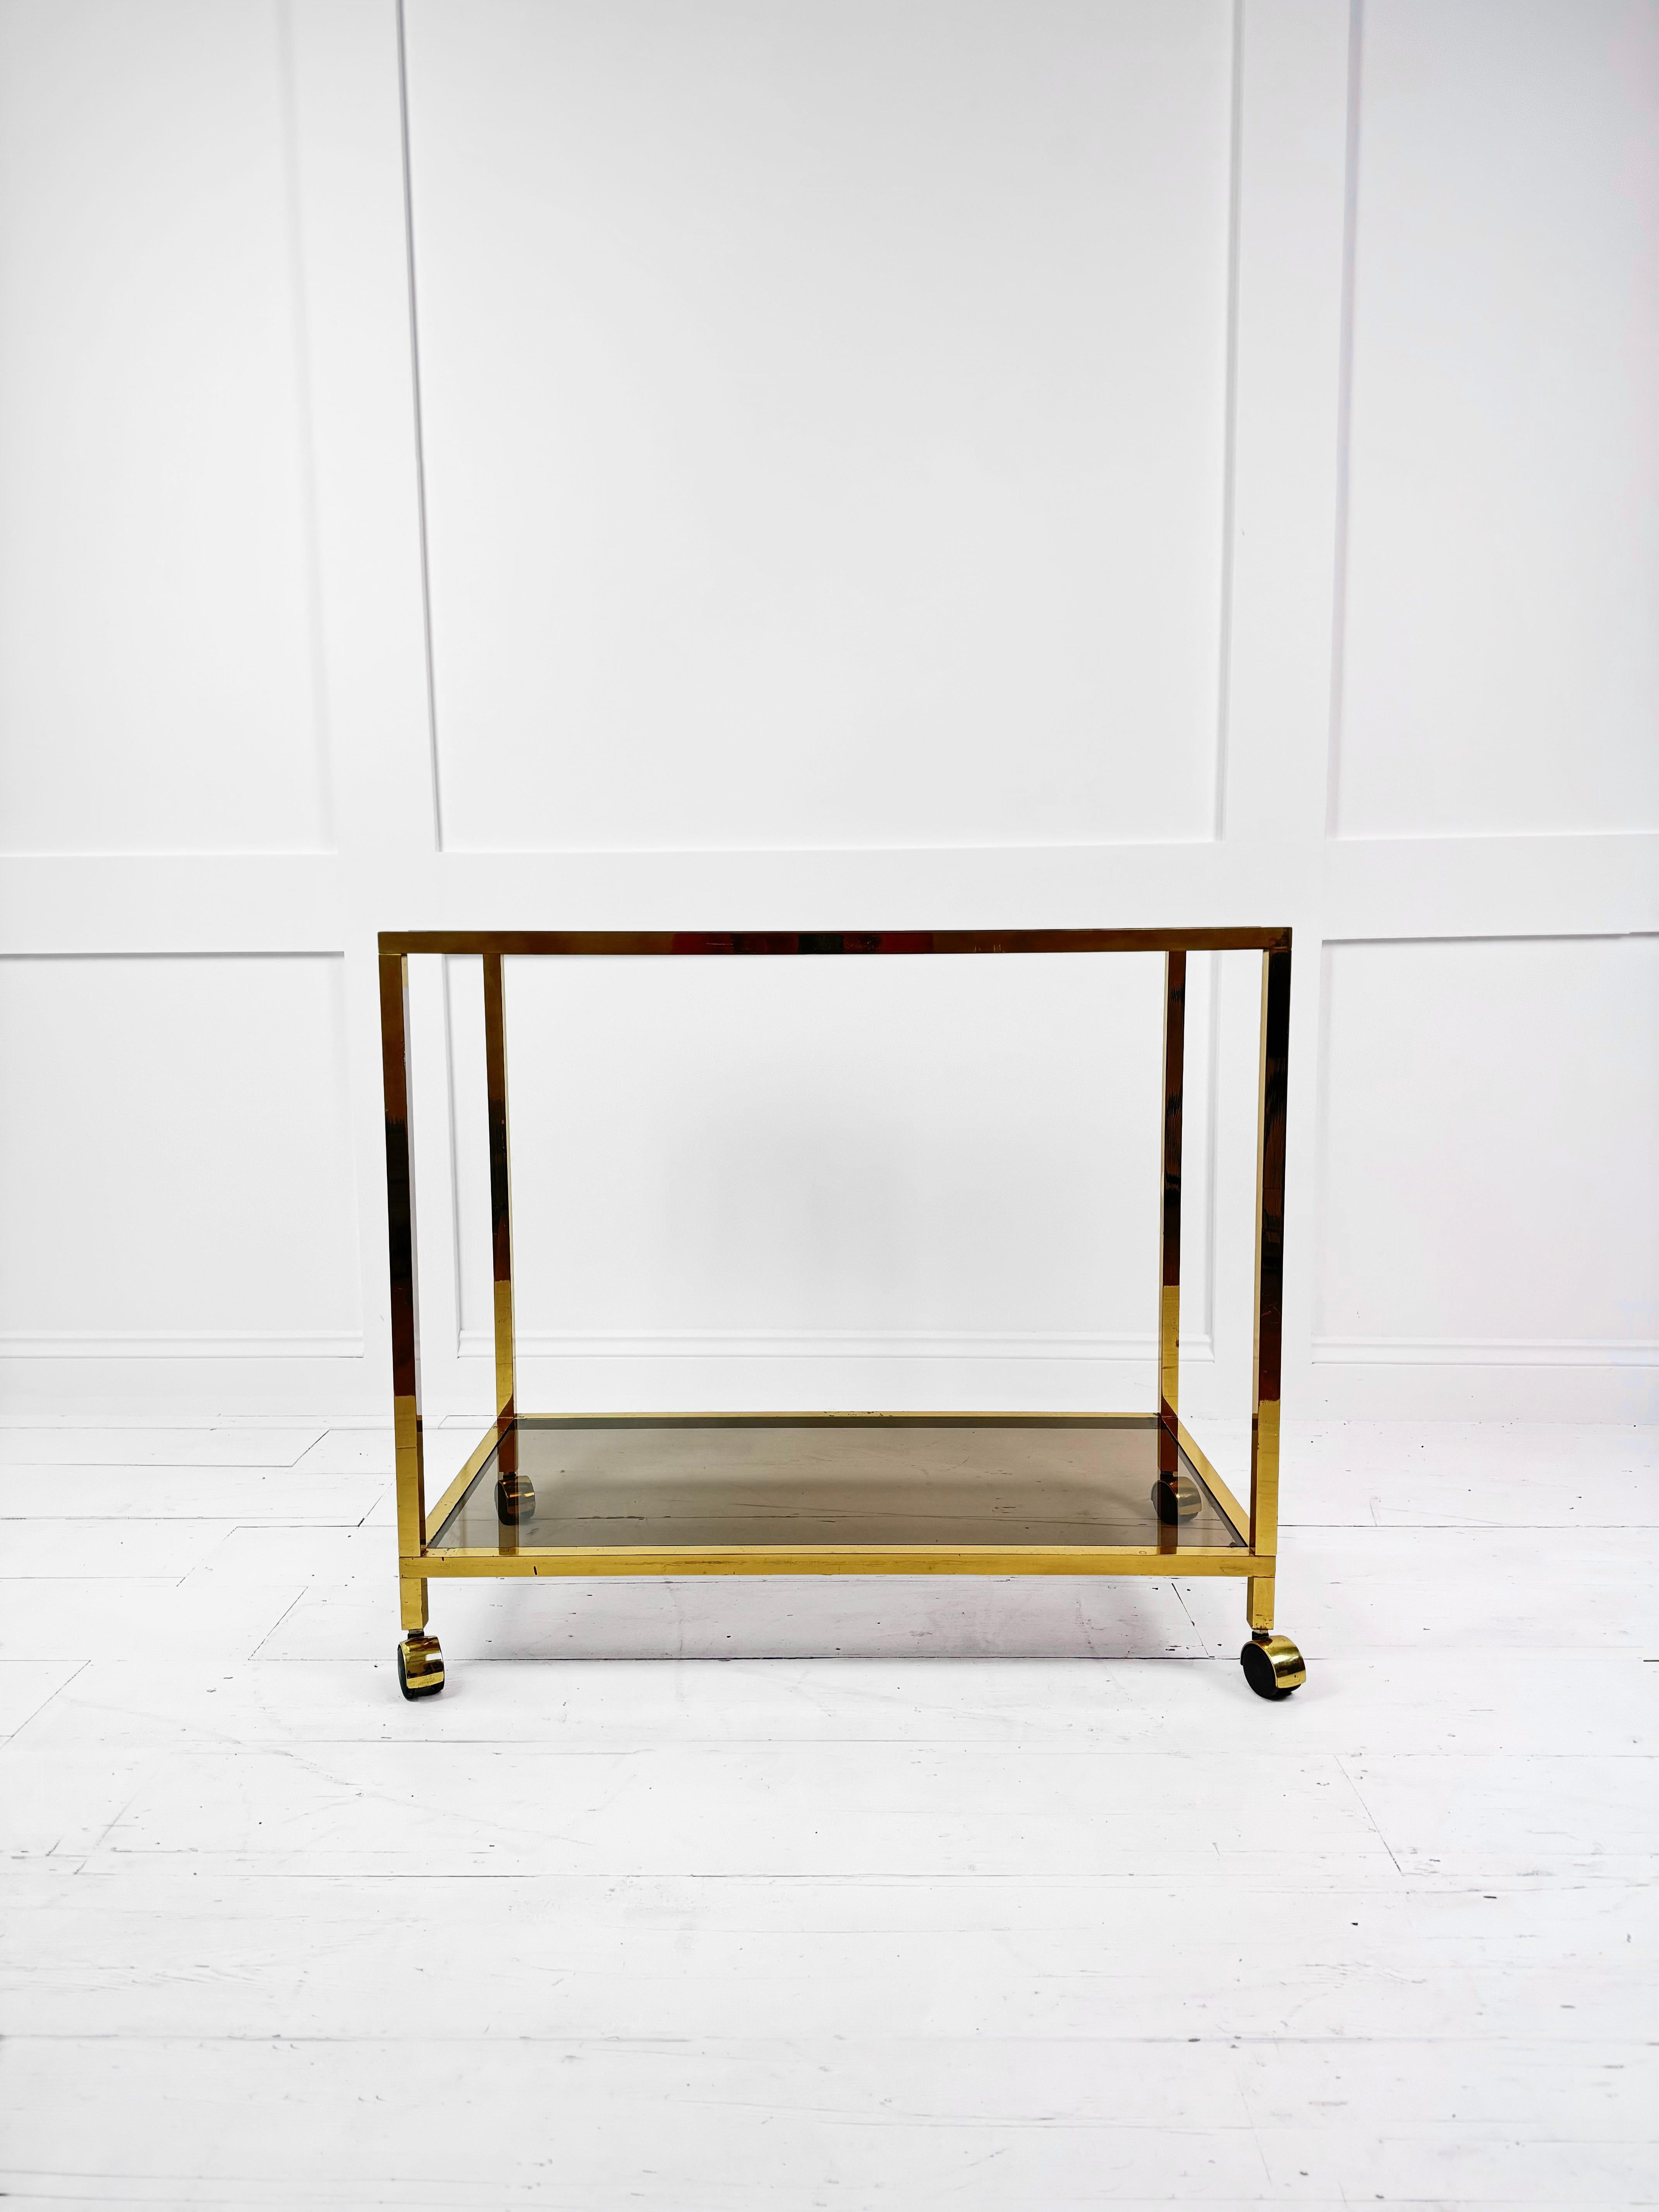 This vintage Brass Midcentury Side Table / Drinks Trolley from Belgium is a stunning piece of furniture from the 1970s. Crafted in Brass and featuring a smoked glass top and lower shelf, this table exudes a timeless Midcentury aesthetic. Its